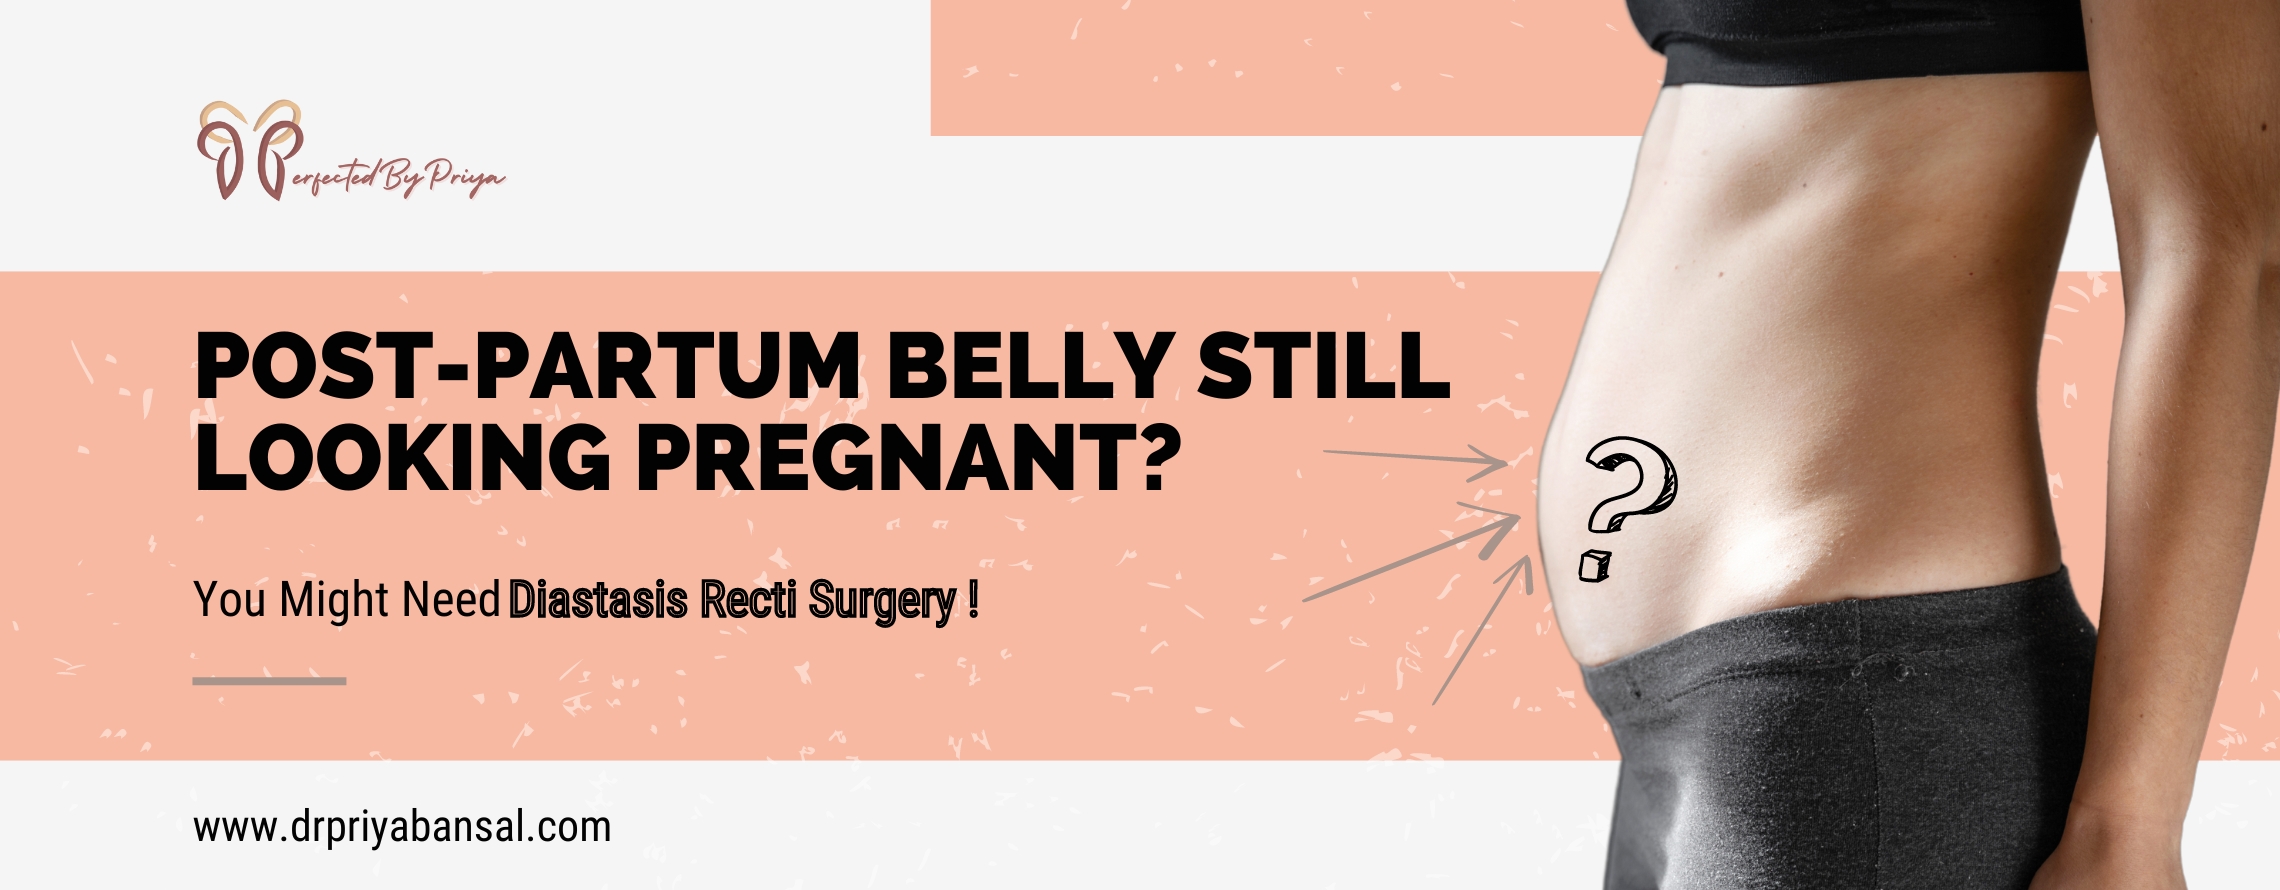 What Does Diastasis Recti Look Like? - Sculpt Daily